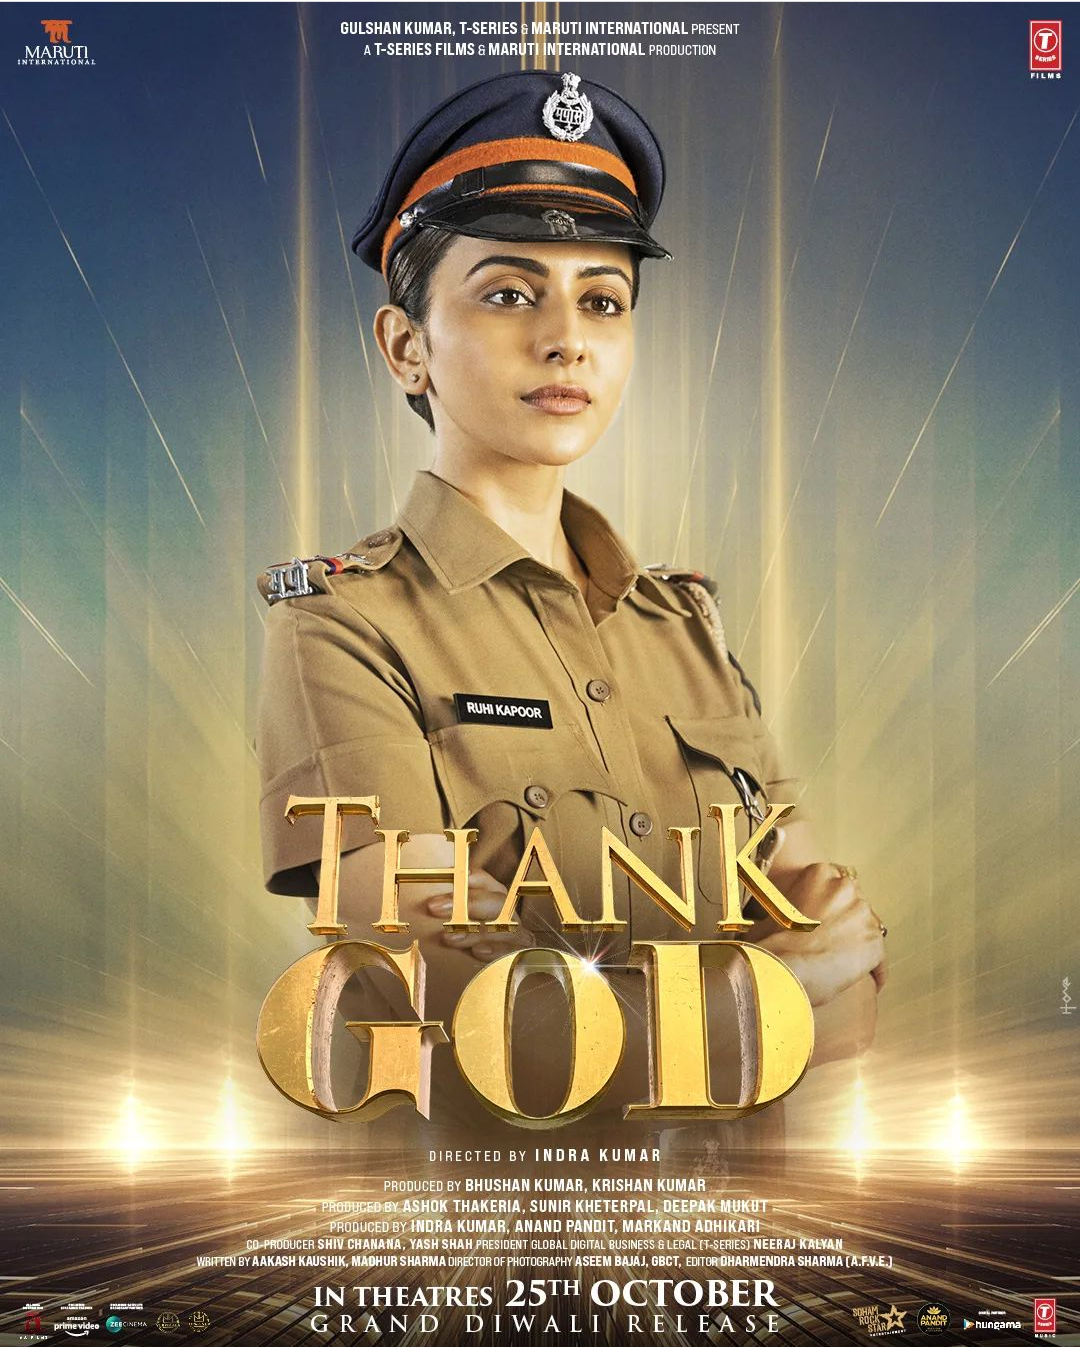 Thank God Rakul Preet Singh first look poster out : Outlook Hindi